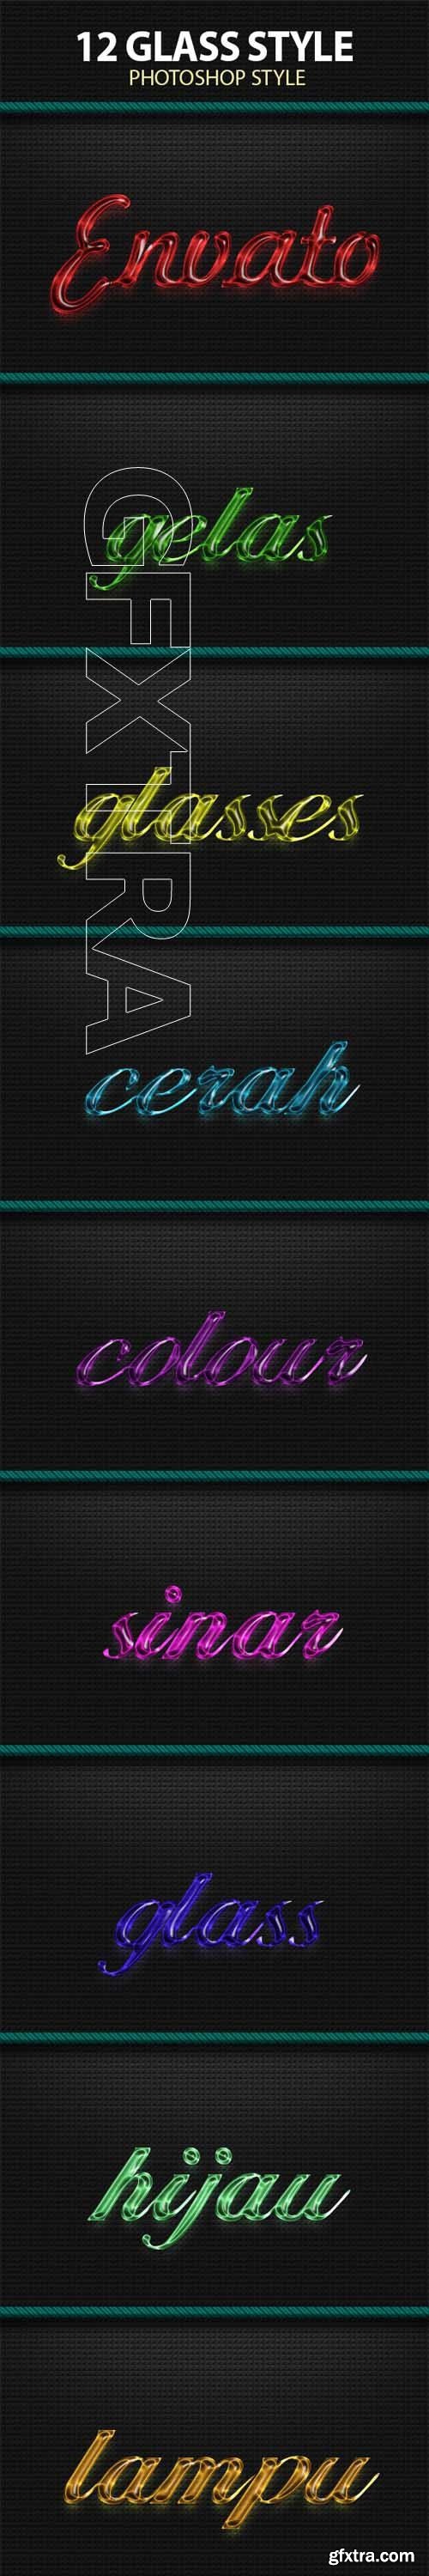 GraphicRiver - 12 Glasses Style Text Efek 20677725